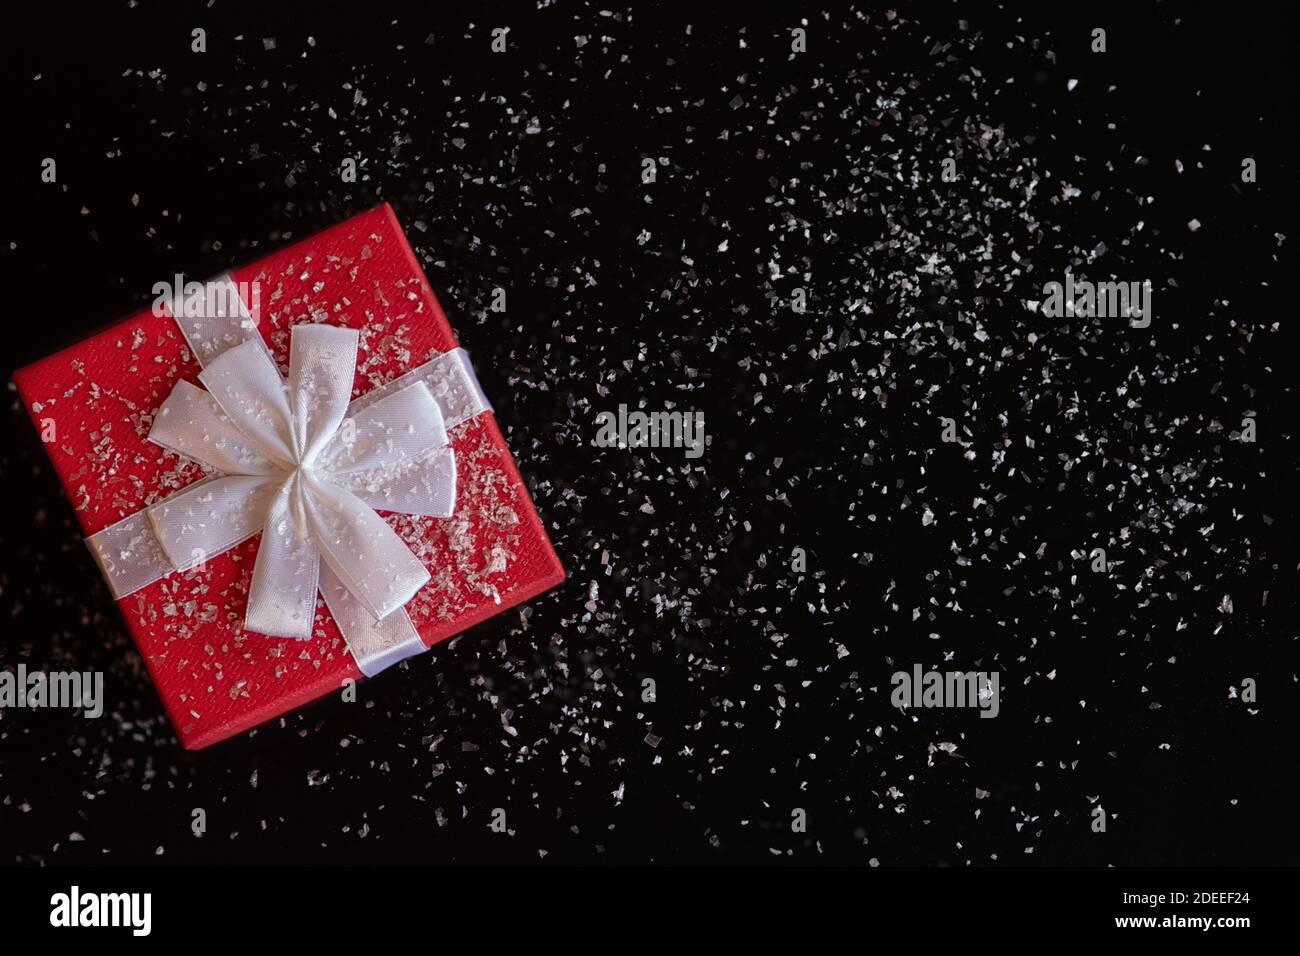 Red gift box with a white bow on a black background Stock Photo